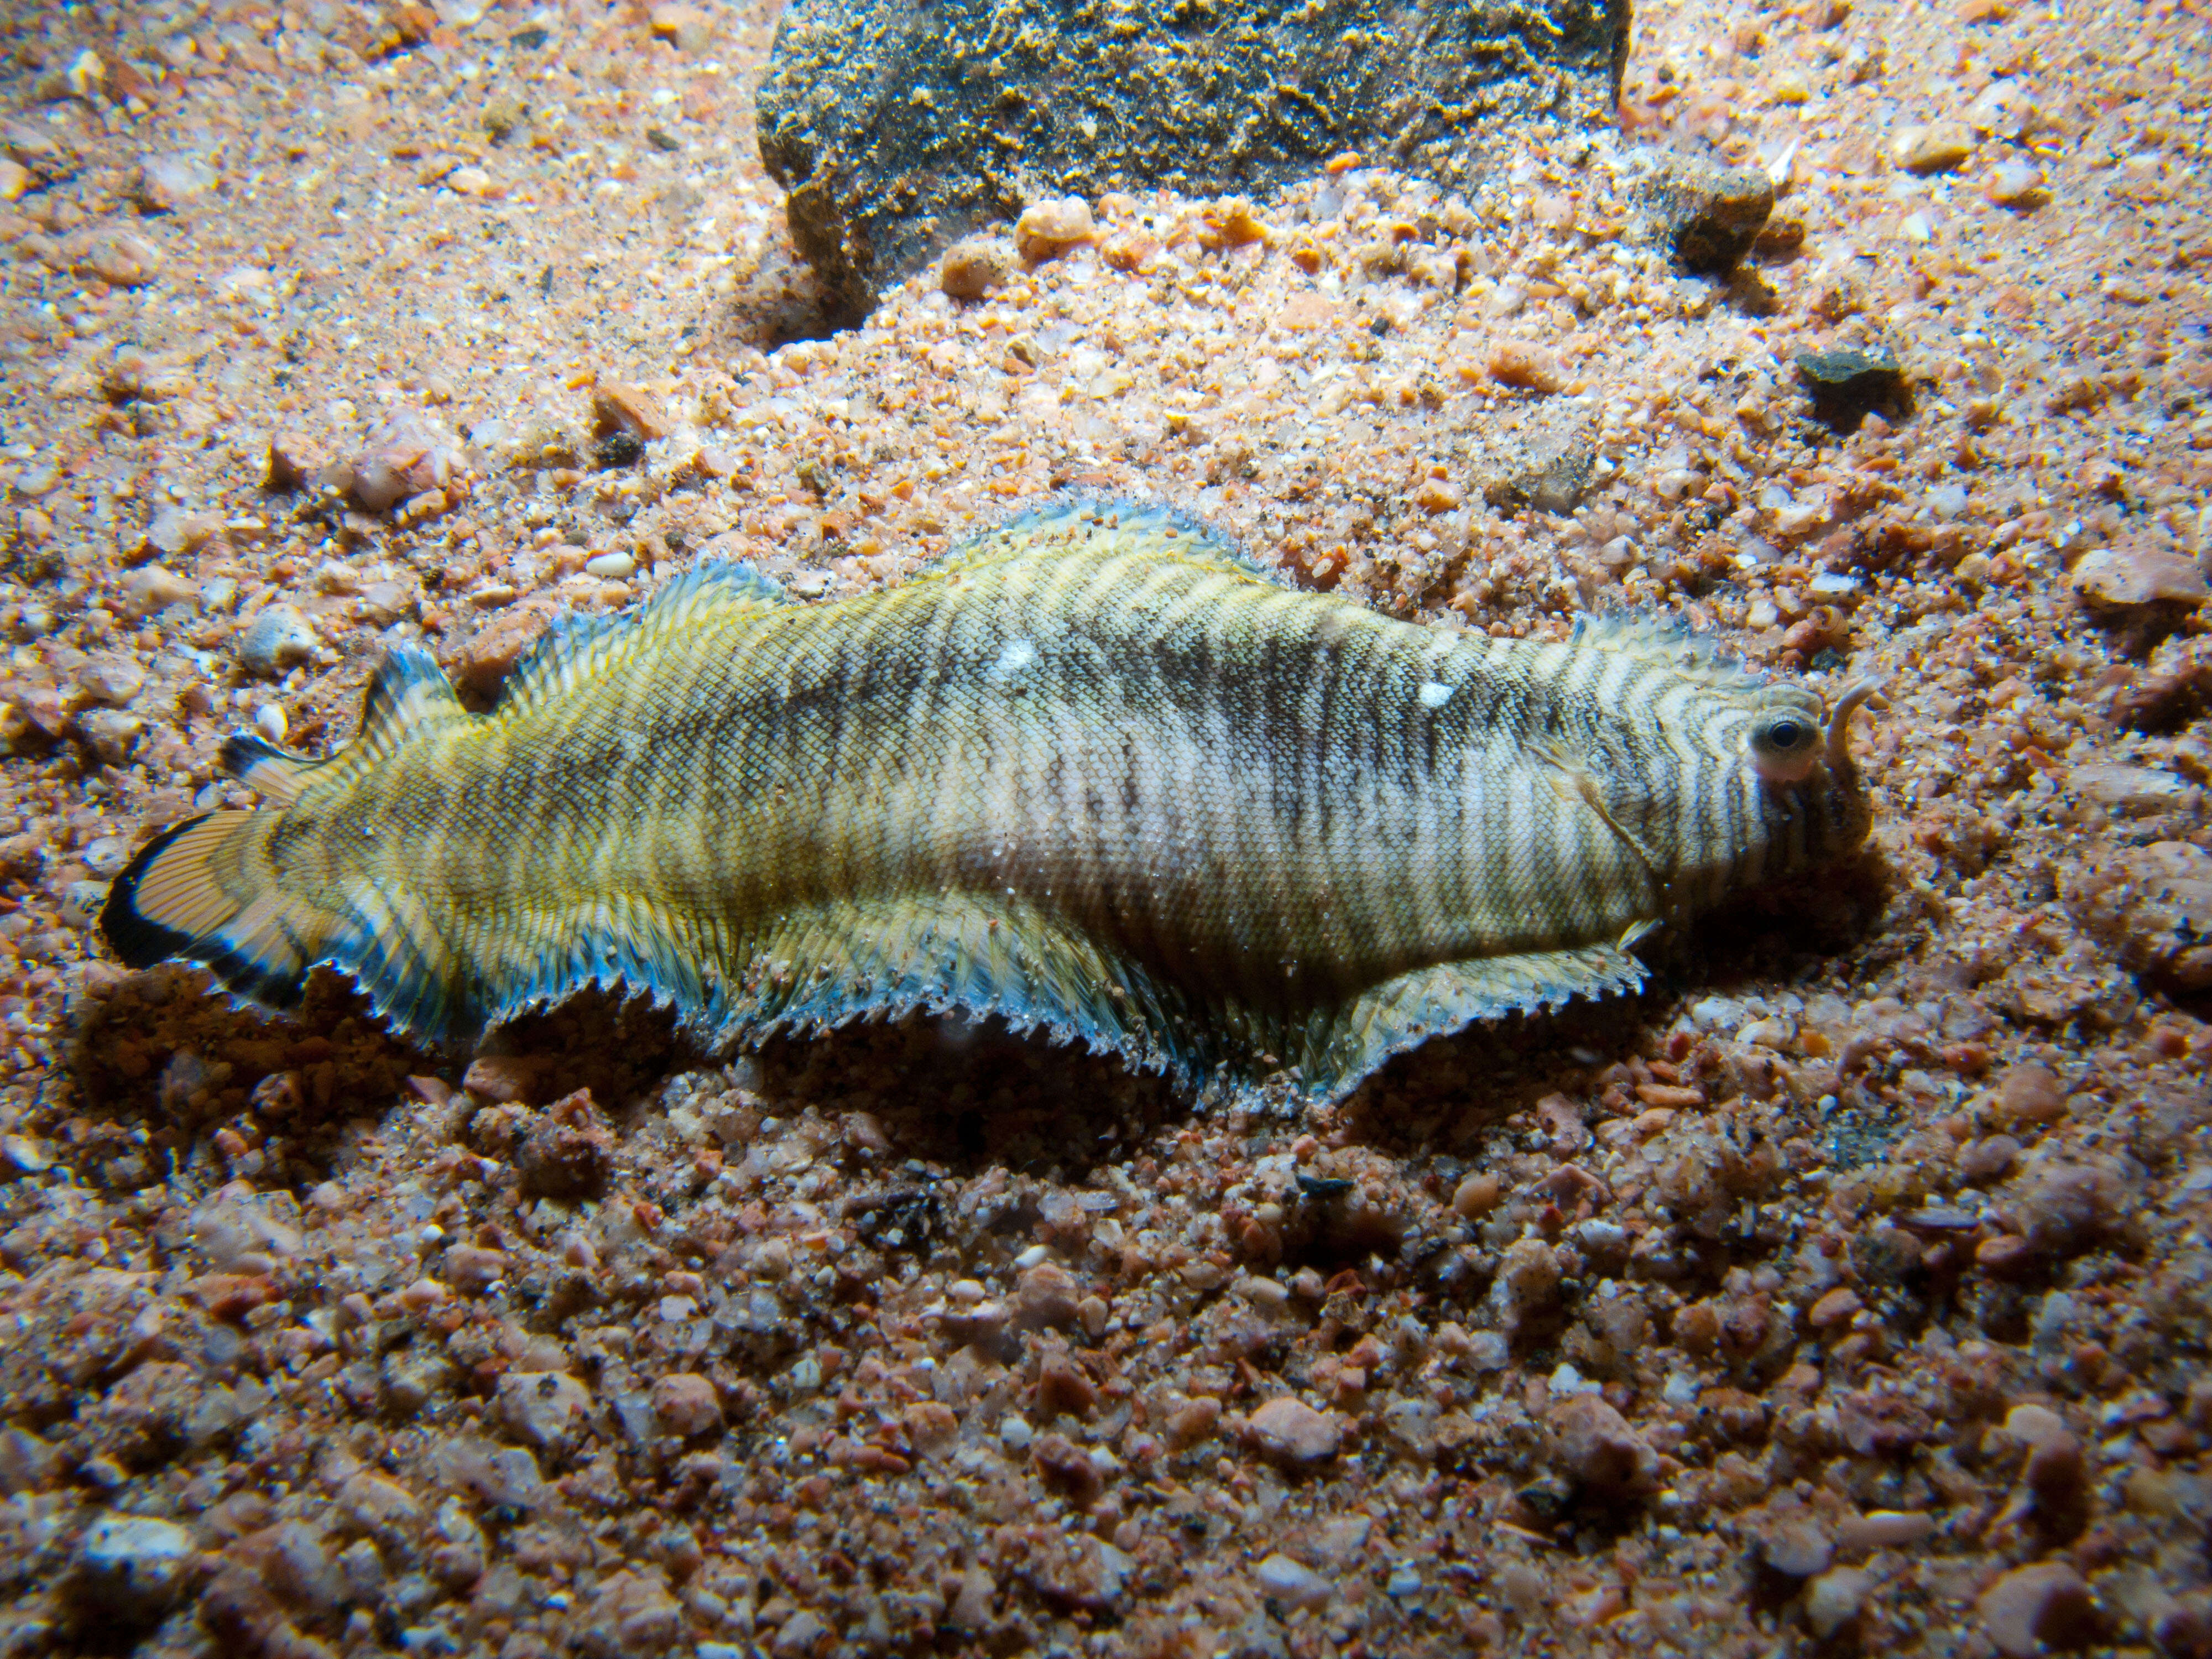 Image of yellow-spotted sole